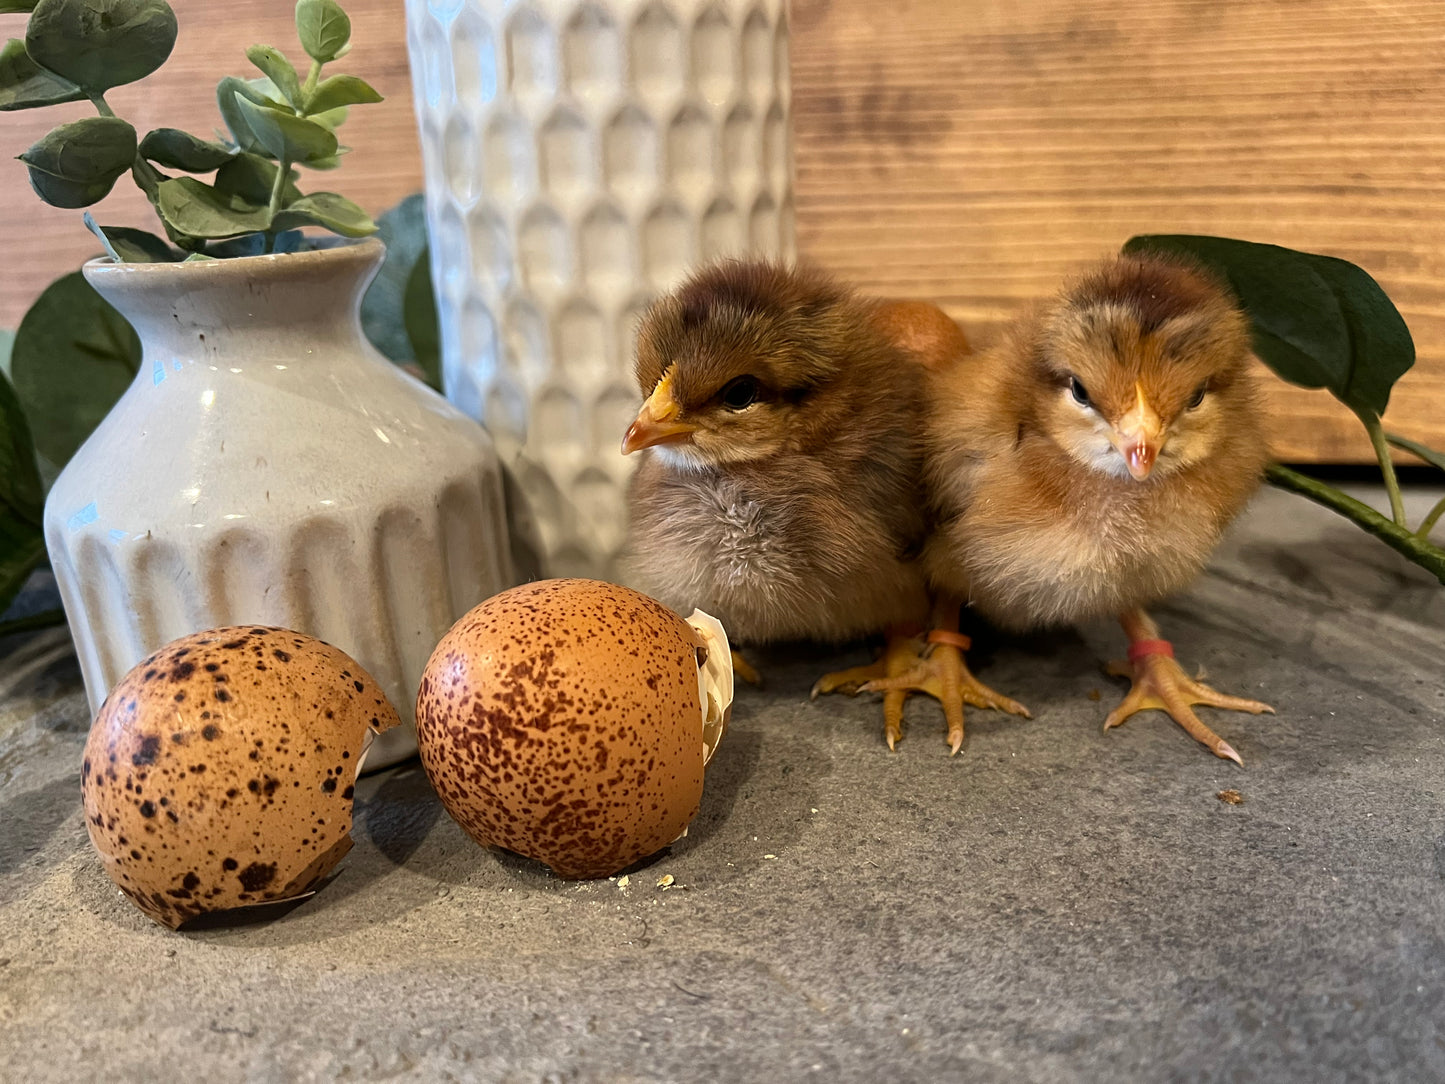 Speckled Project Pen Chicks- Minimum of 3 chicks